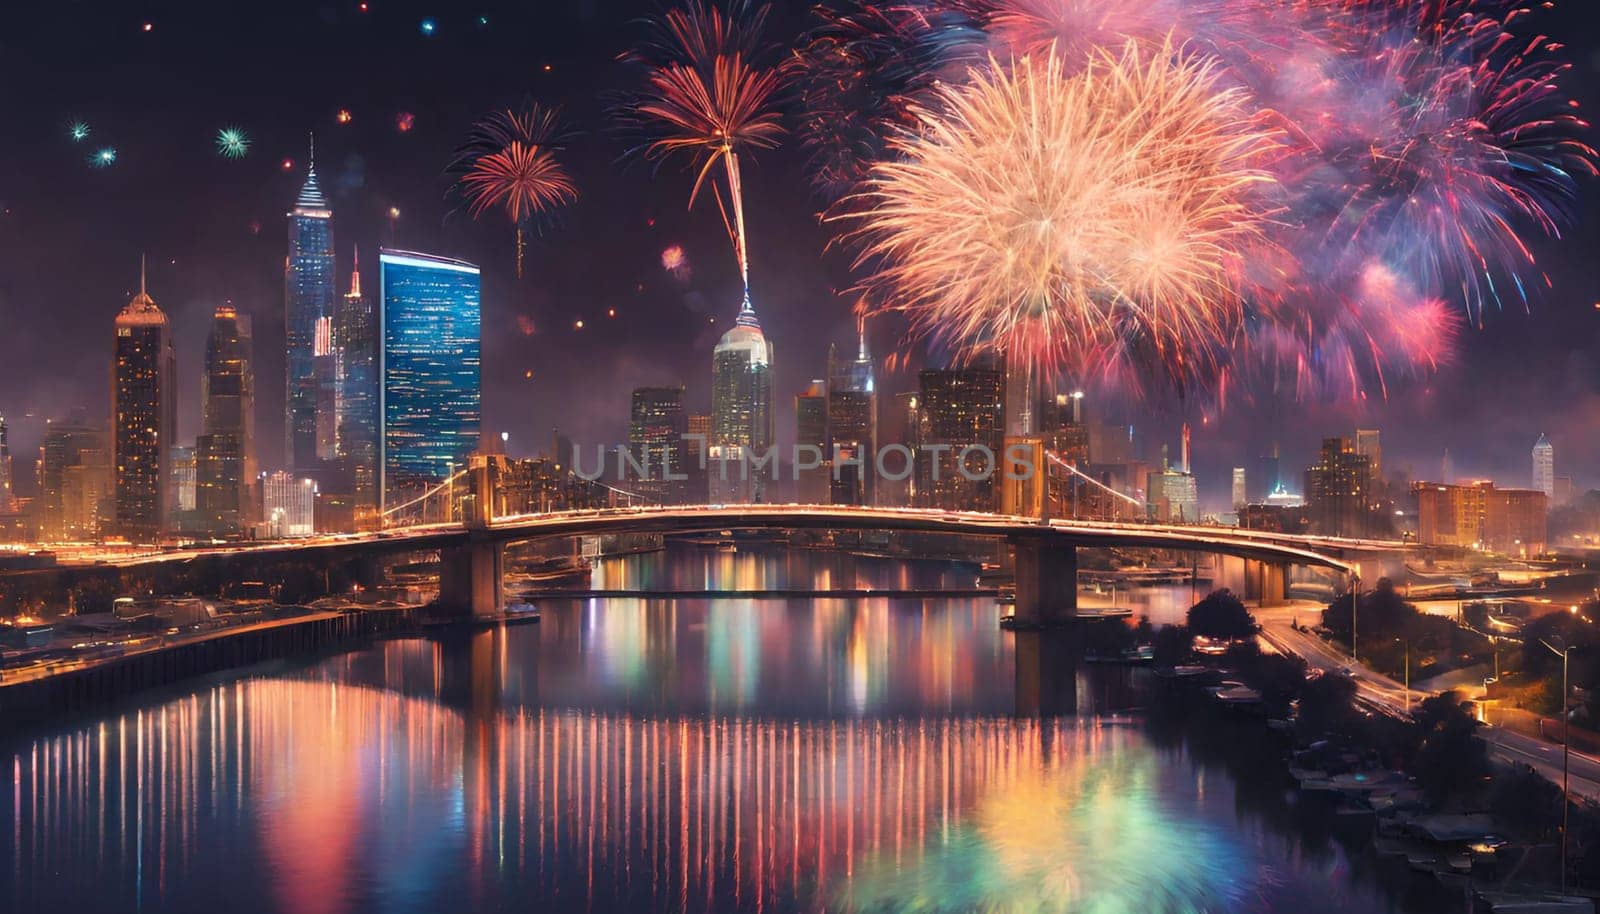 valentine's day. A city skyline at night with colorful lights and fireworks. The buildings are tall and modern, and the sky is dark and starry. by Designlab